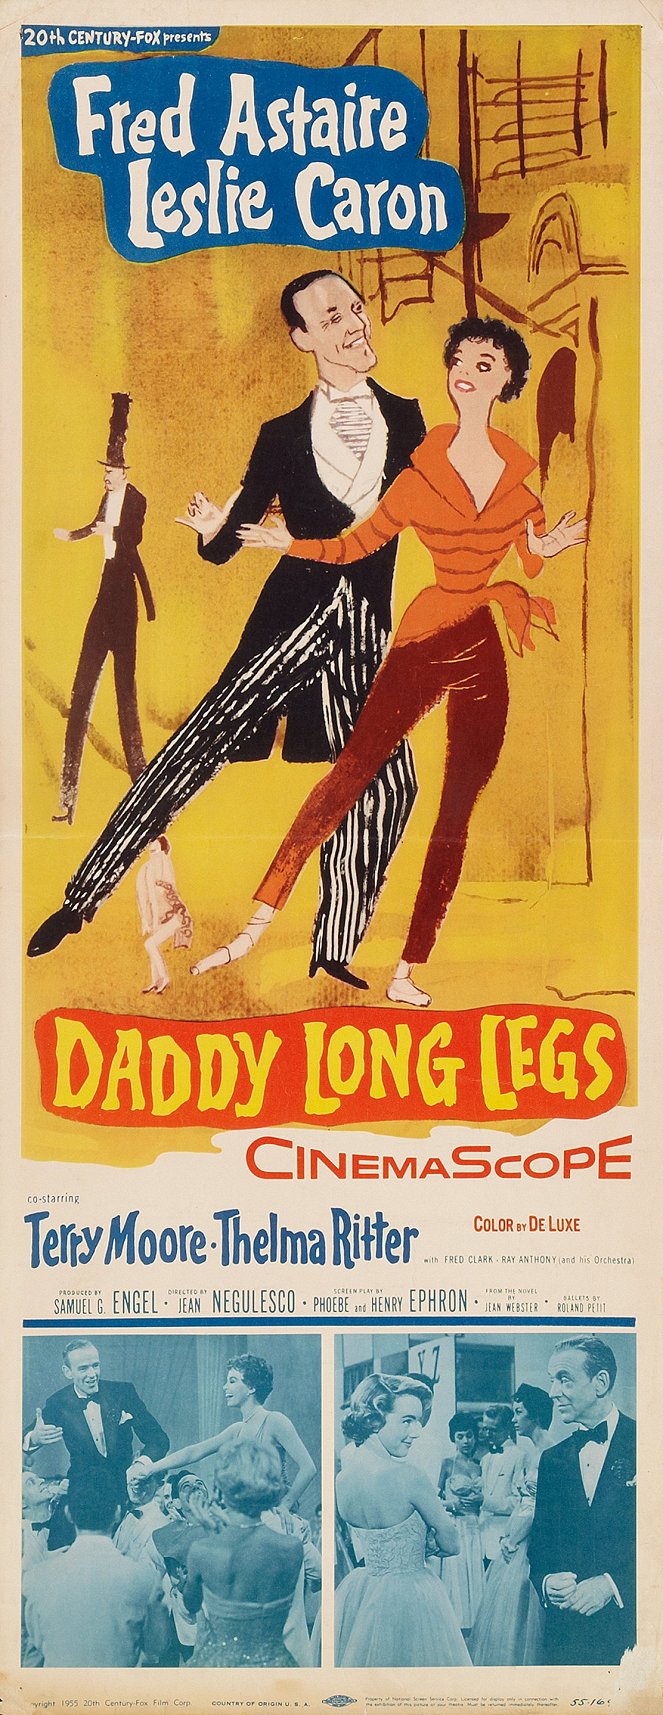 Papa longues jambes - Affiches